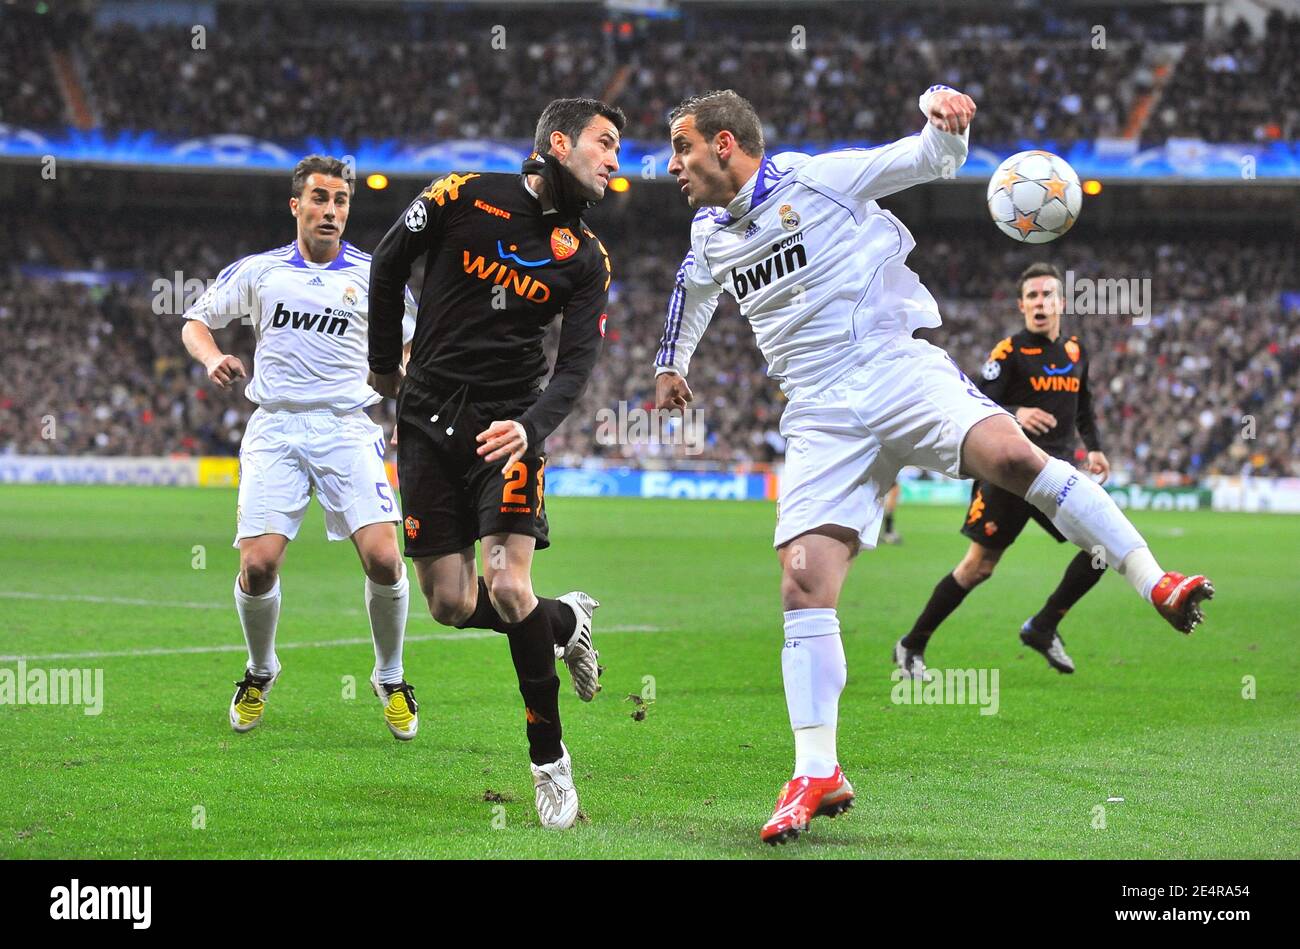 AS Roma's Christian Panucci and Real Madrid's Roberto Soldado battle for the ball in the air during the Champions League first knockout round second leg soccer match, Real Madrid vs AS Roma at the Santiago Bernabeu Stadium in Madrid, Spain on March 5, 2008. AS Roma won the match 2-1 and sending the Spanish team out of the first knockout round for the fourth season in a row. Photo by Steeve McMay/Cameleon/ABACAPRESS.COM Stock Photo